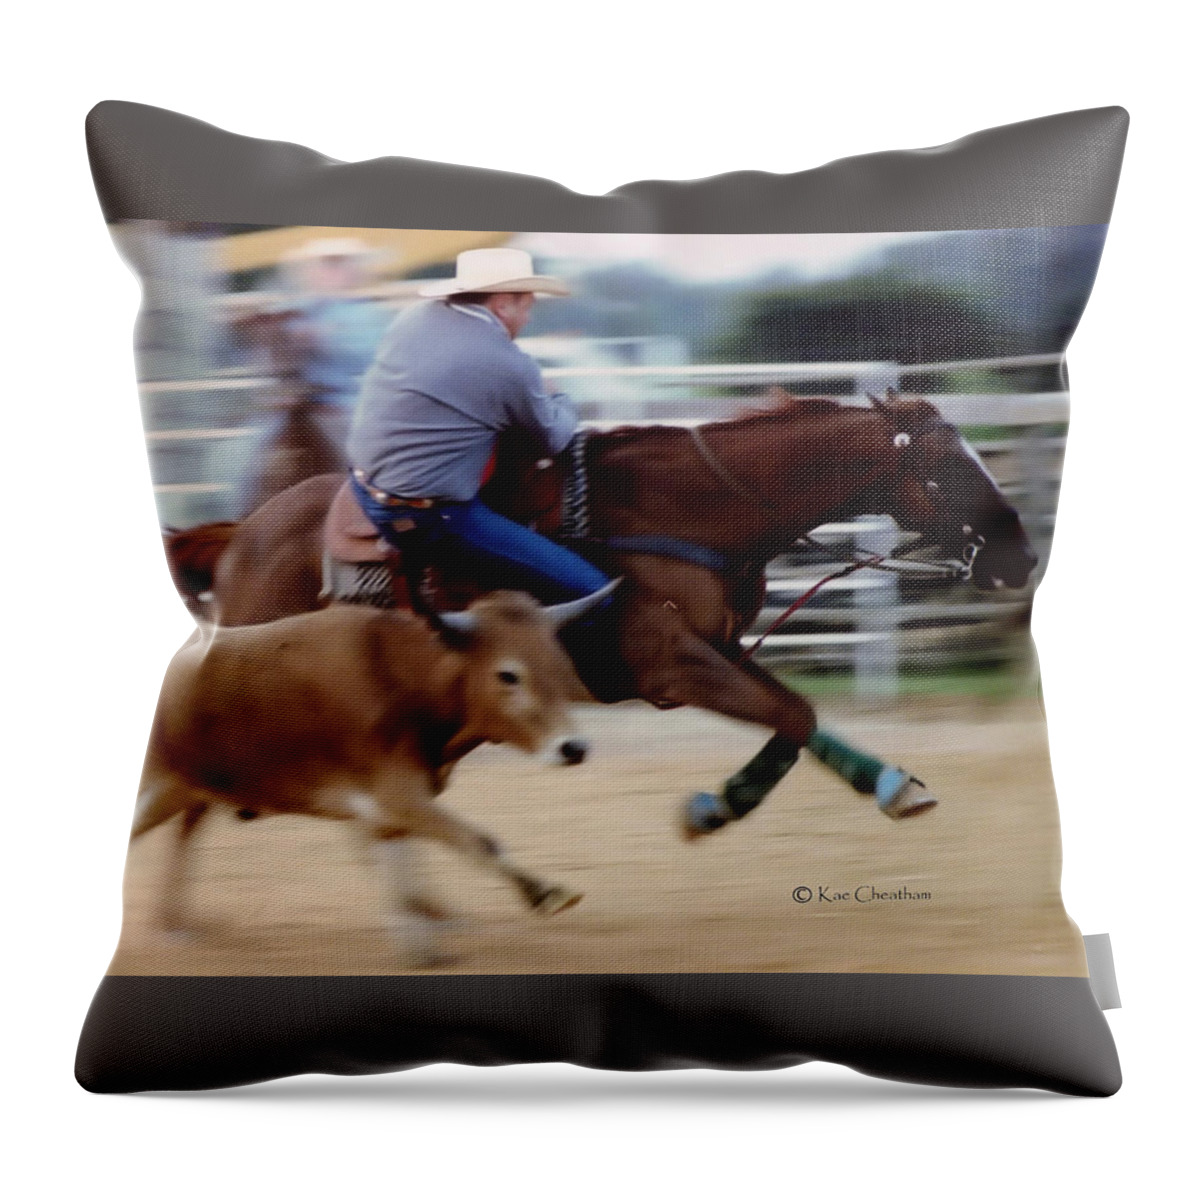 Steer Wrestling Throw Pillow featuring the photograph Steer Wrestling Dilemma by Kae Cheatham